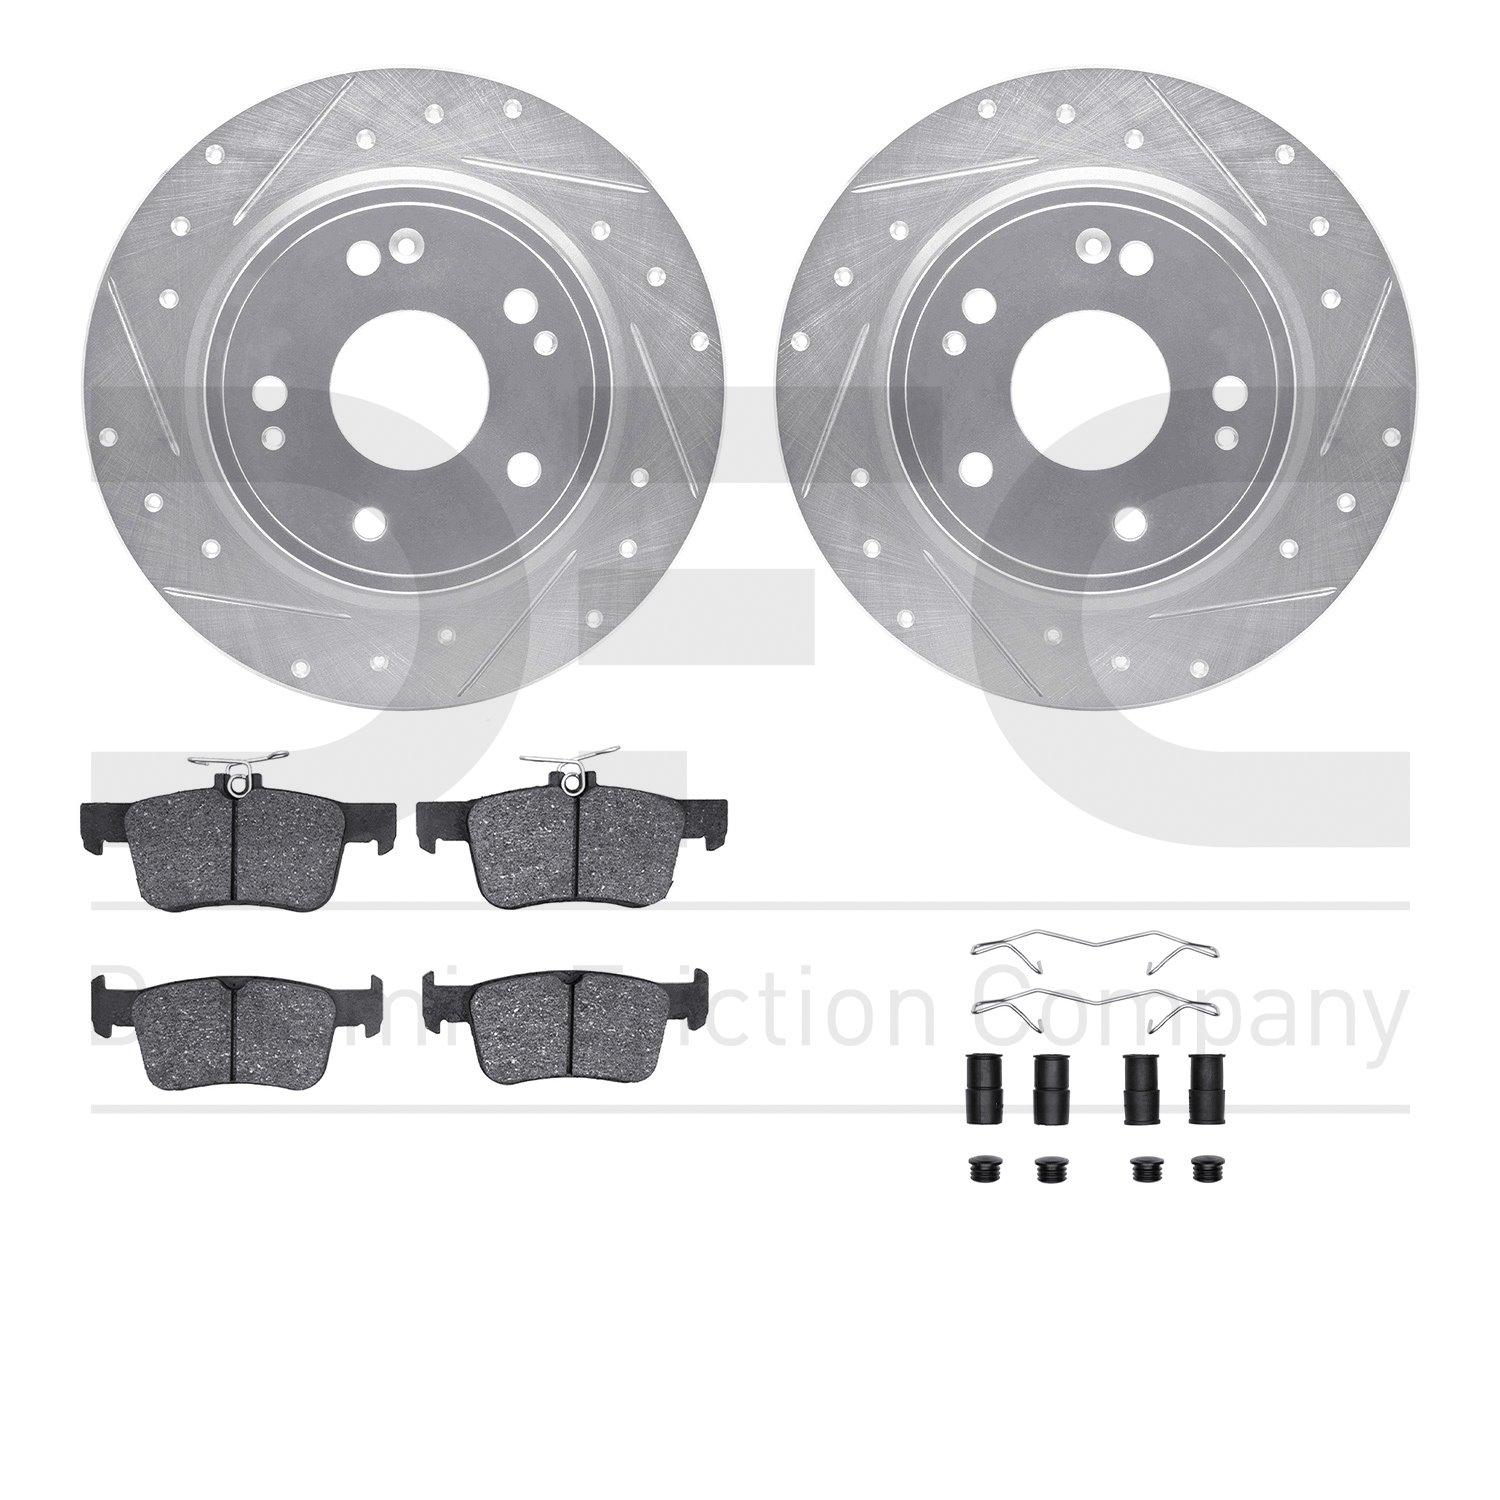 7512-59128 Drilled/Slotted Brake Rotors w/5000 Advanced Brake Pads Kit & Hardware [Silver], Fits Select Acura/Honda, Position: R